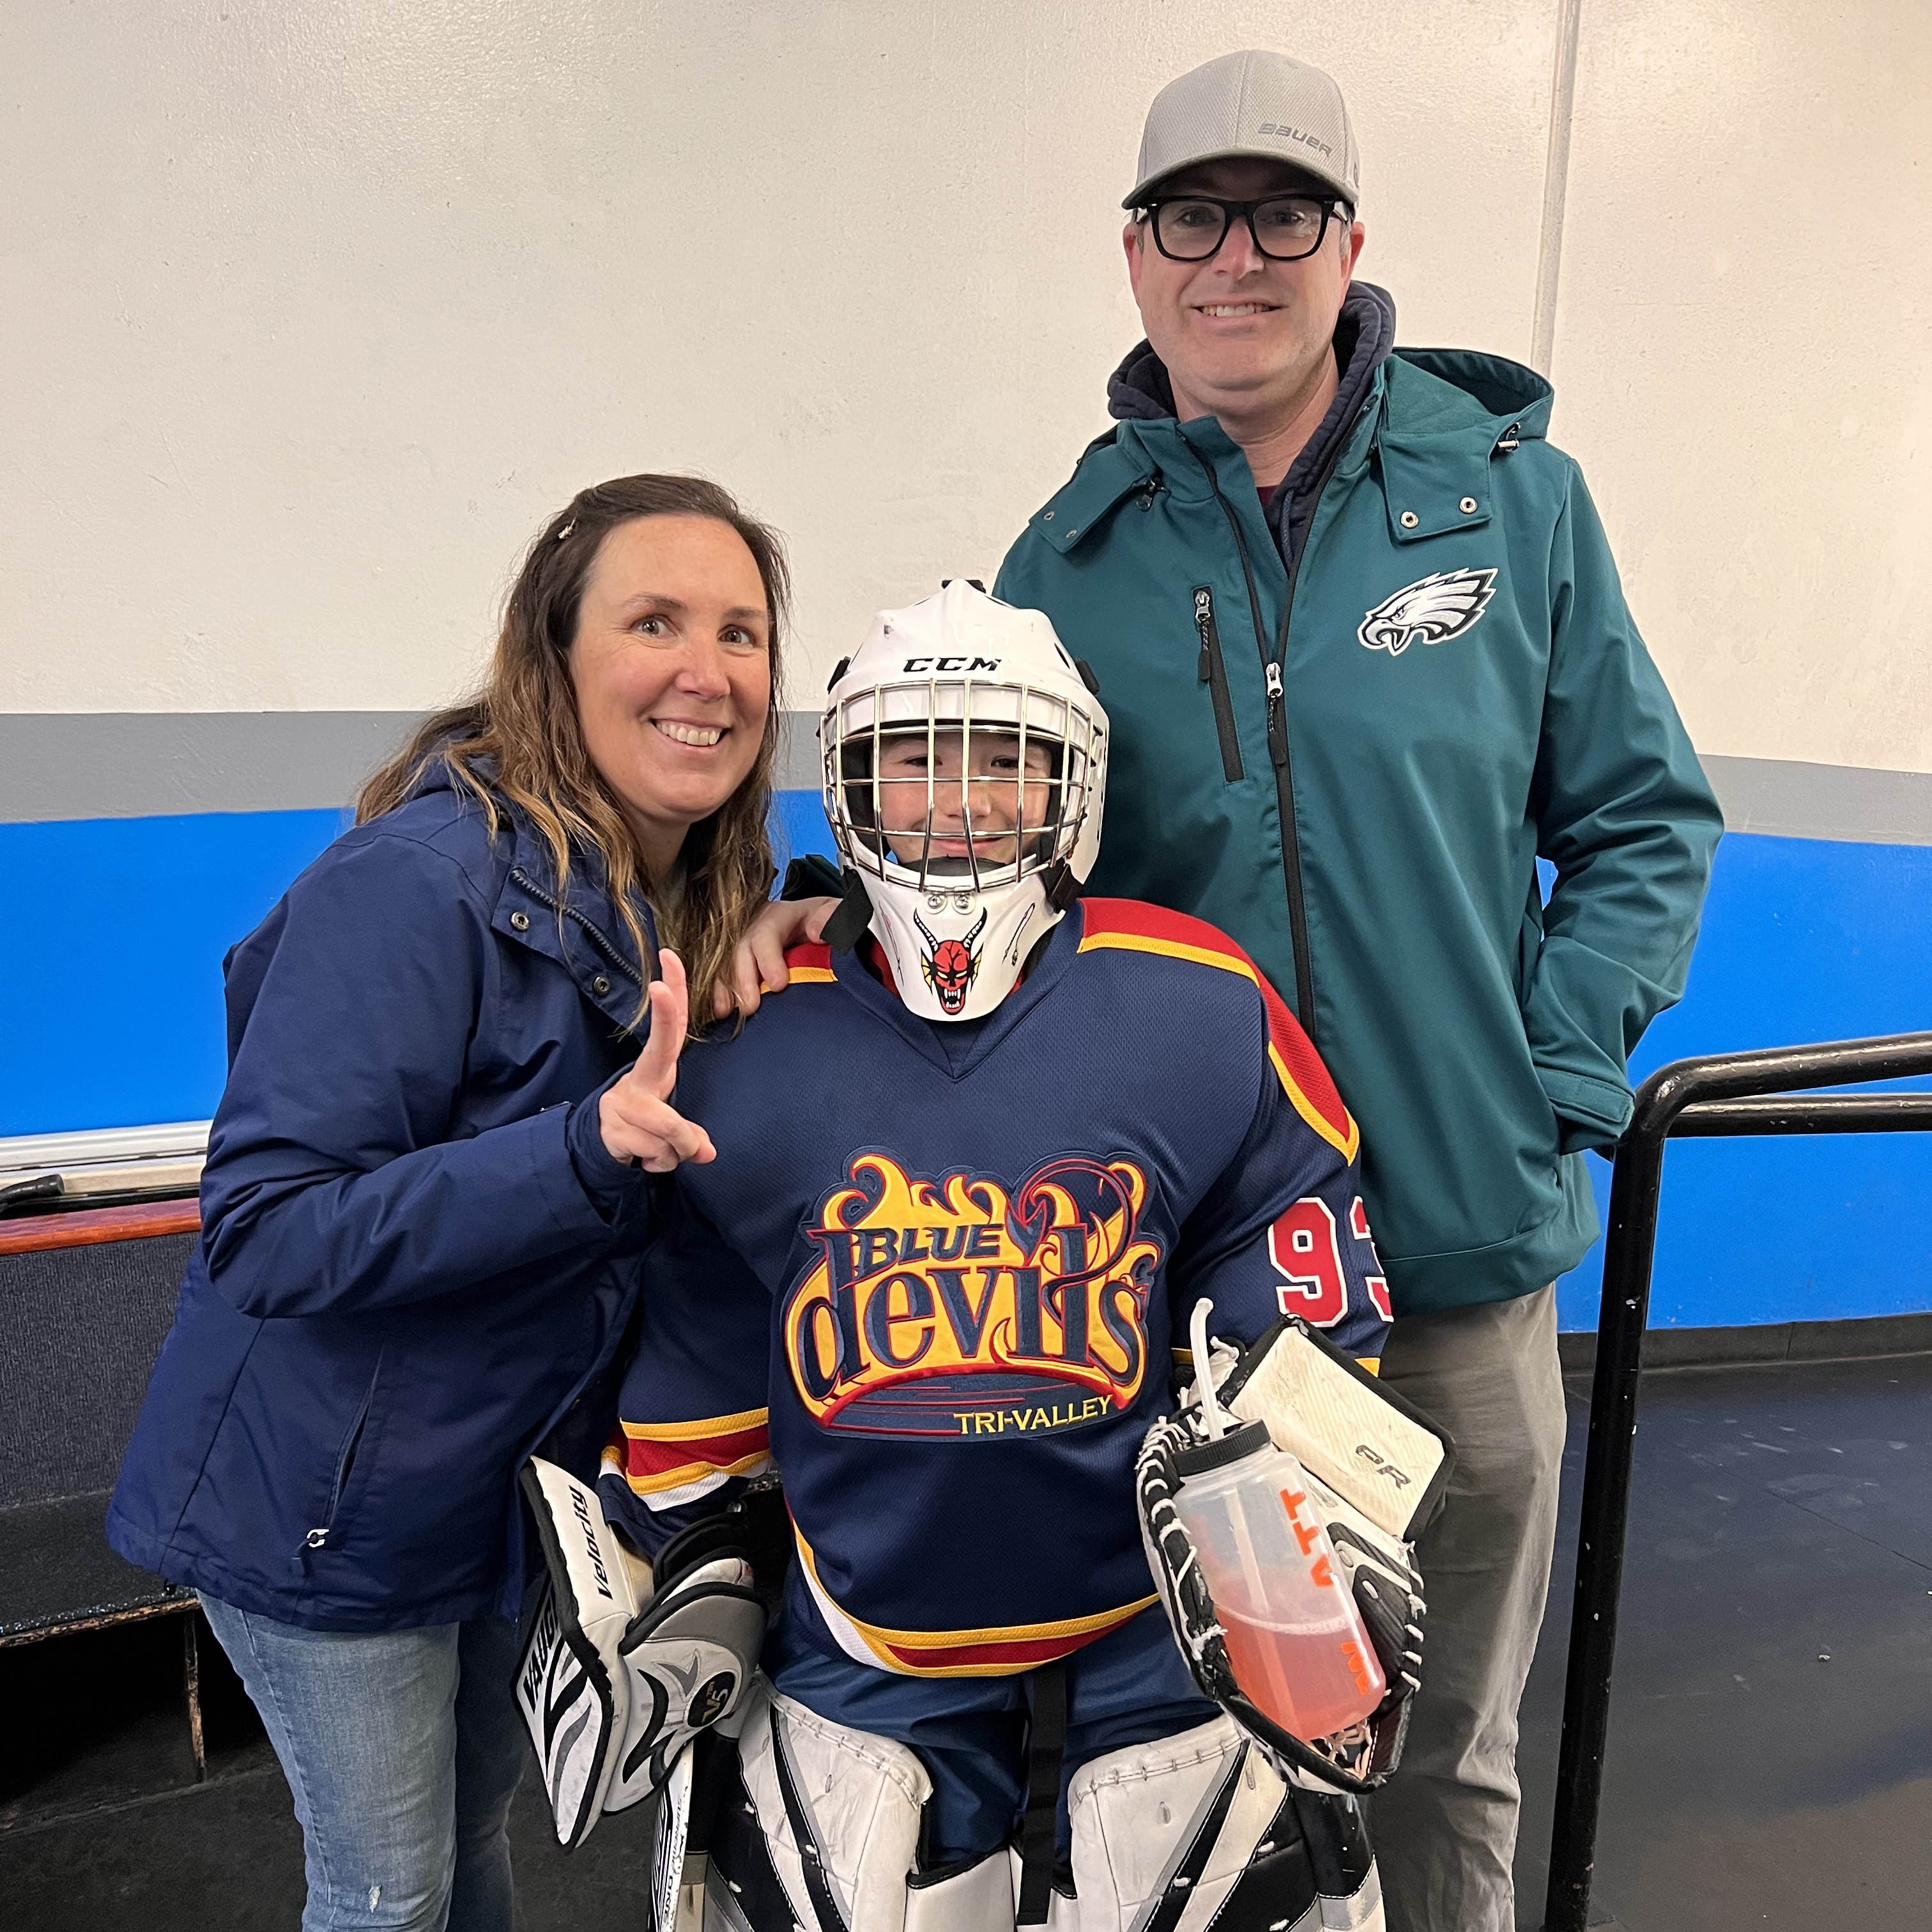 Our hockey family posing with our son who plays goalie